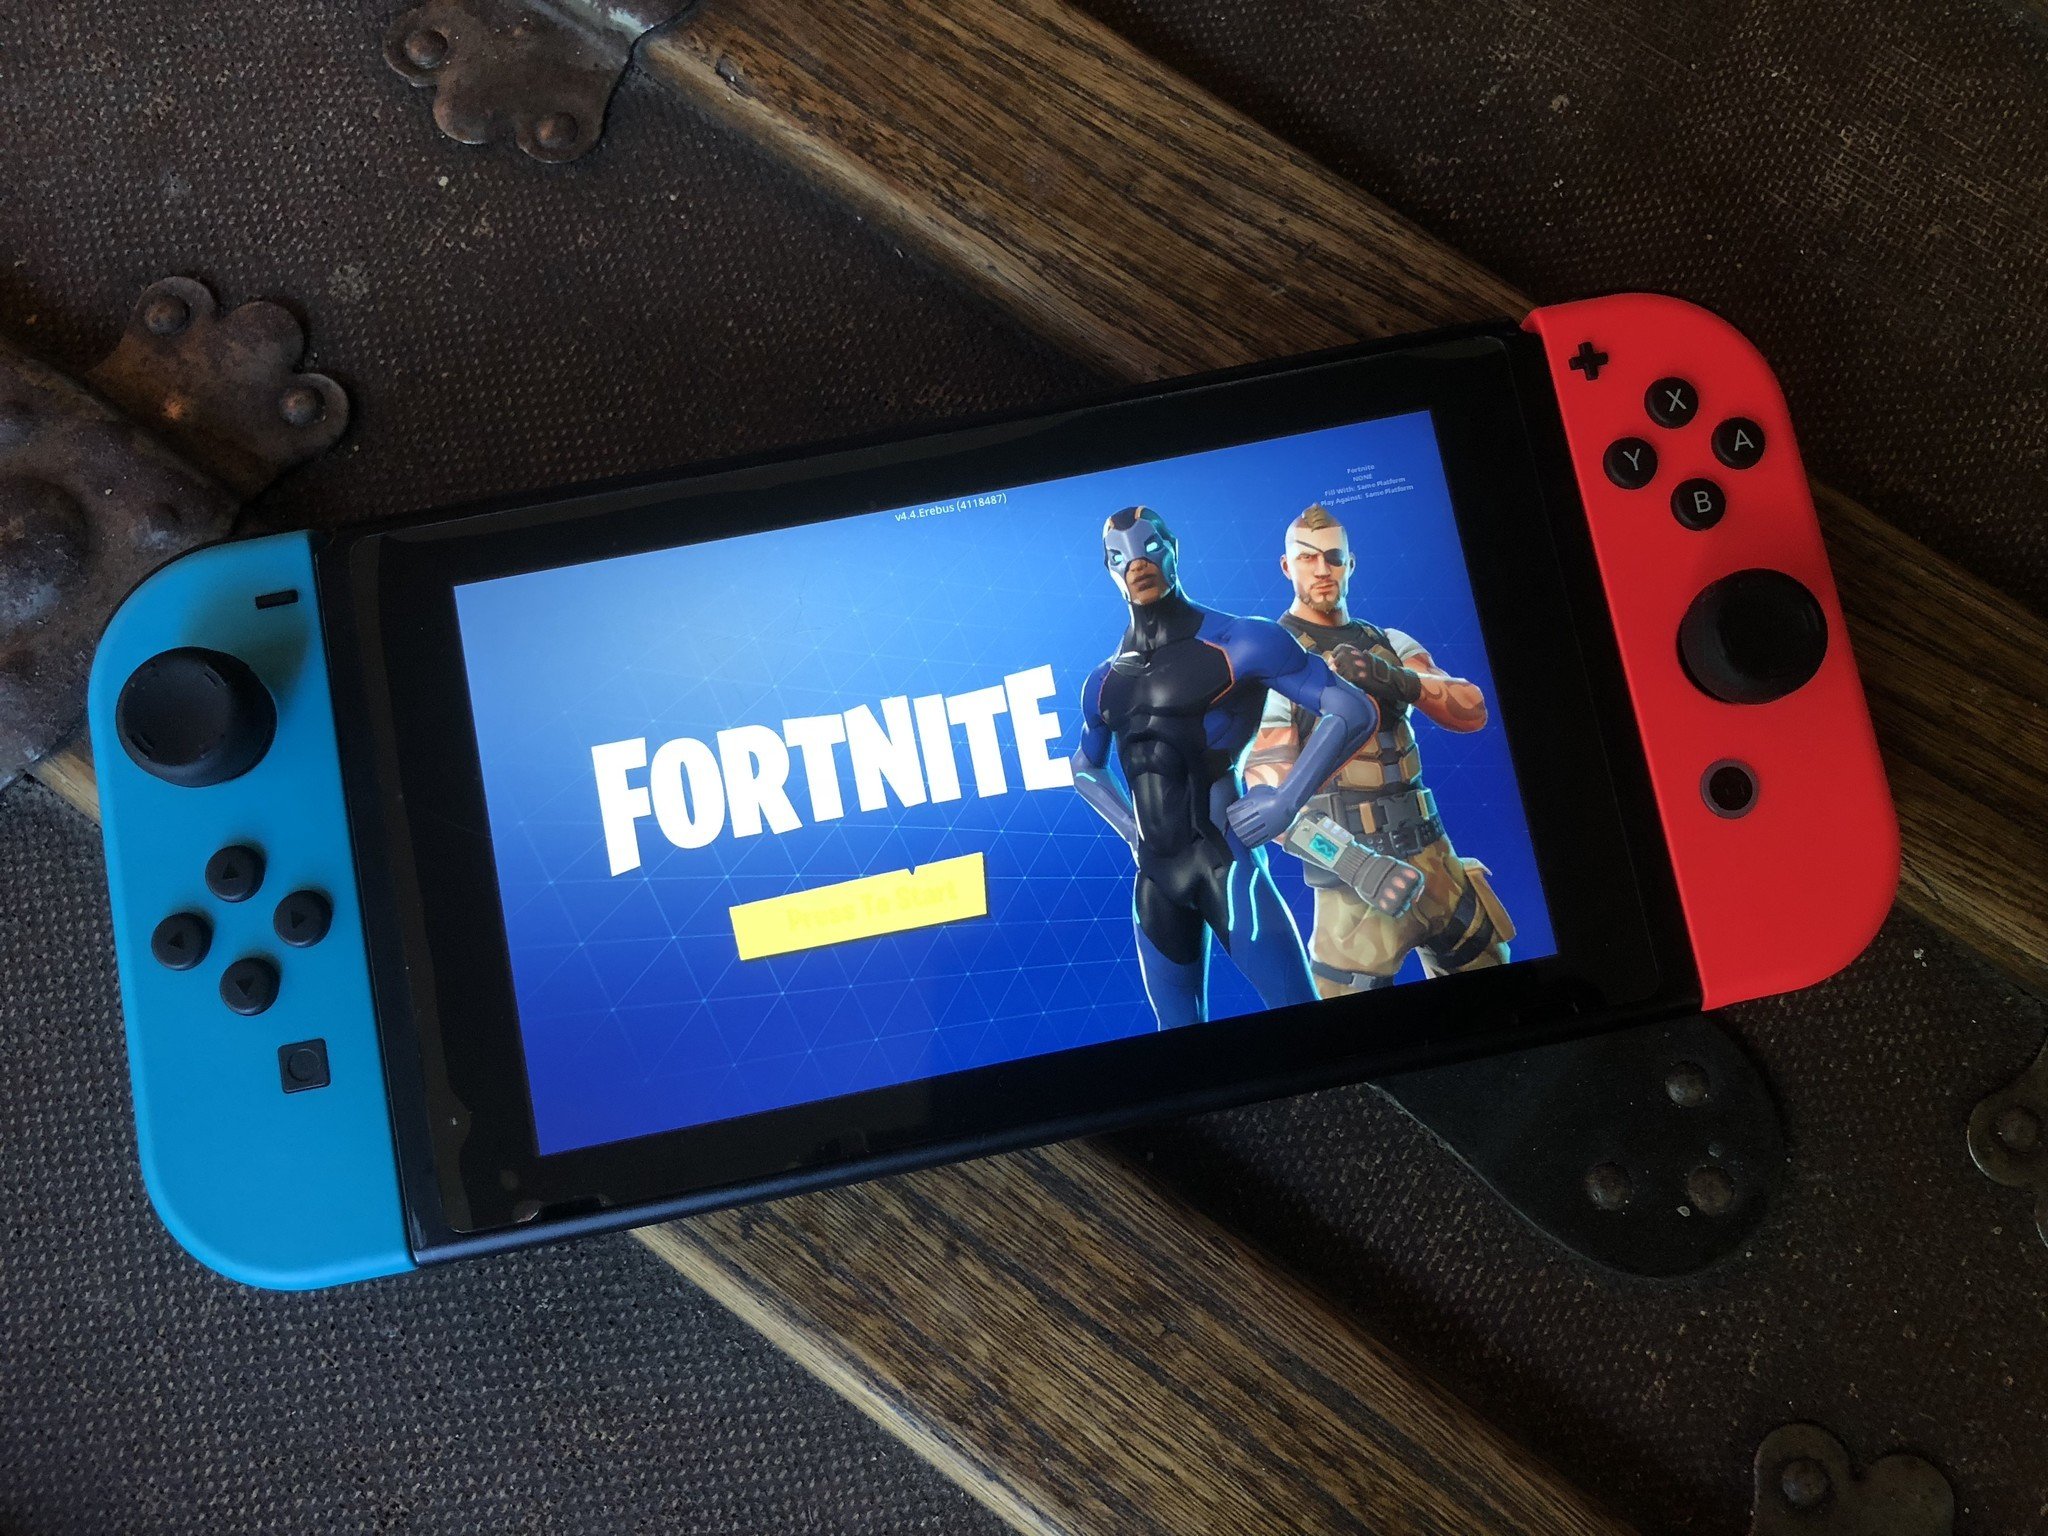 How much data does online gaming on the Nintendo Switch use? | iMore